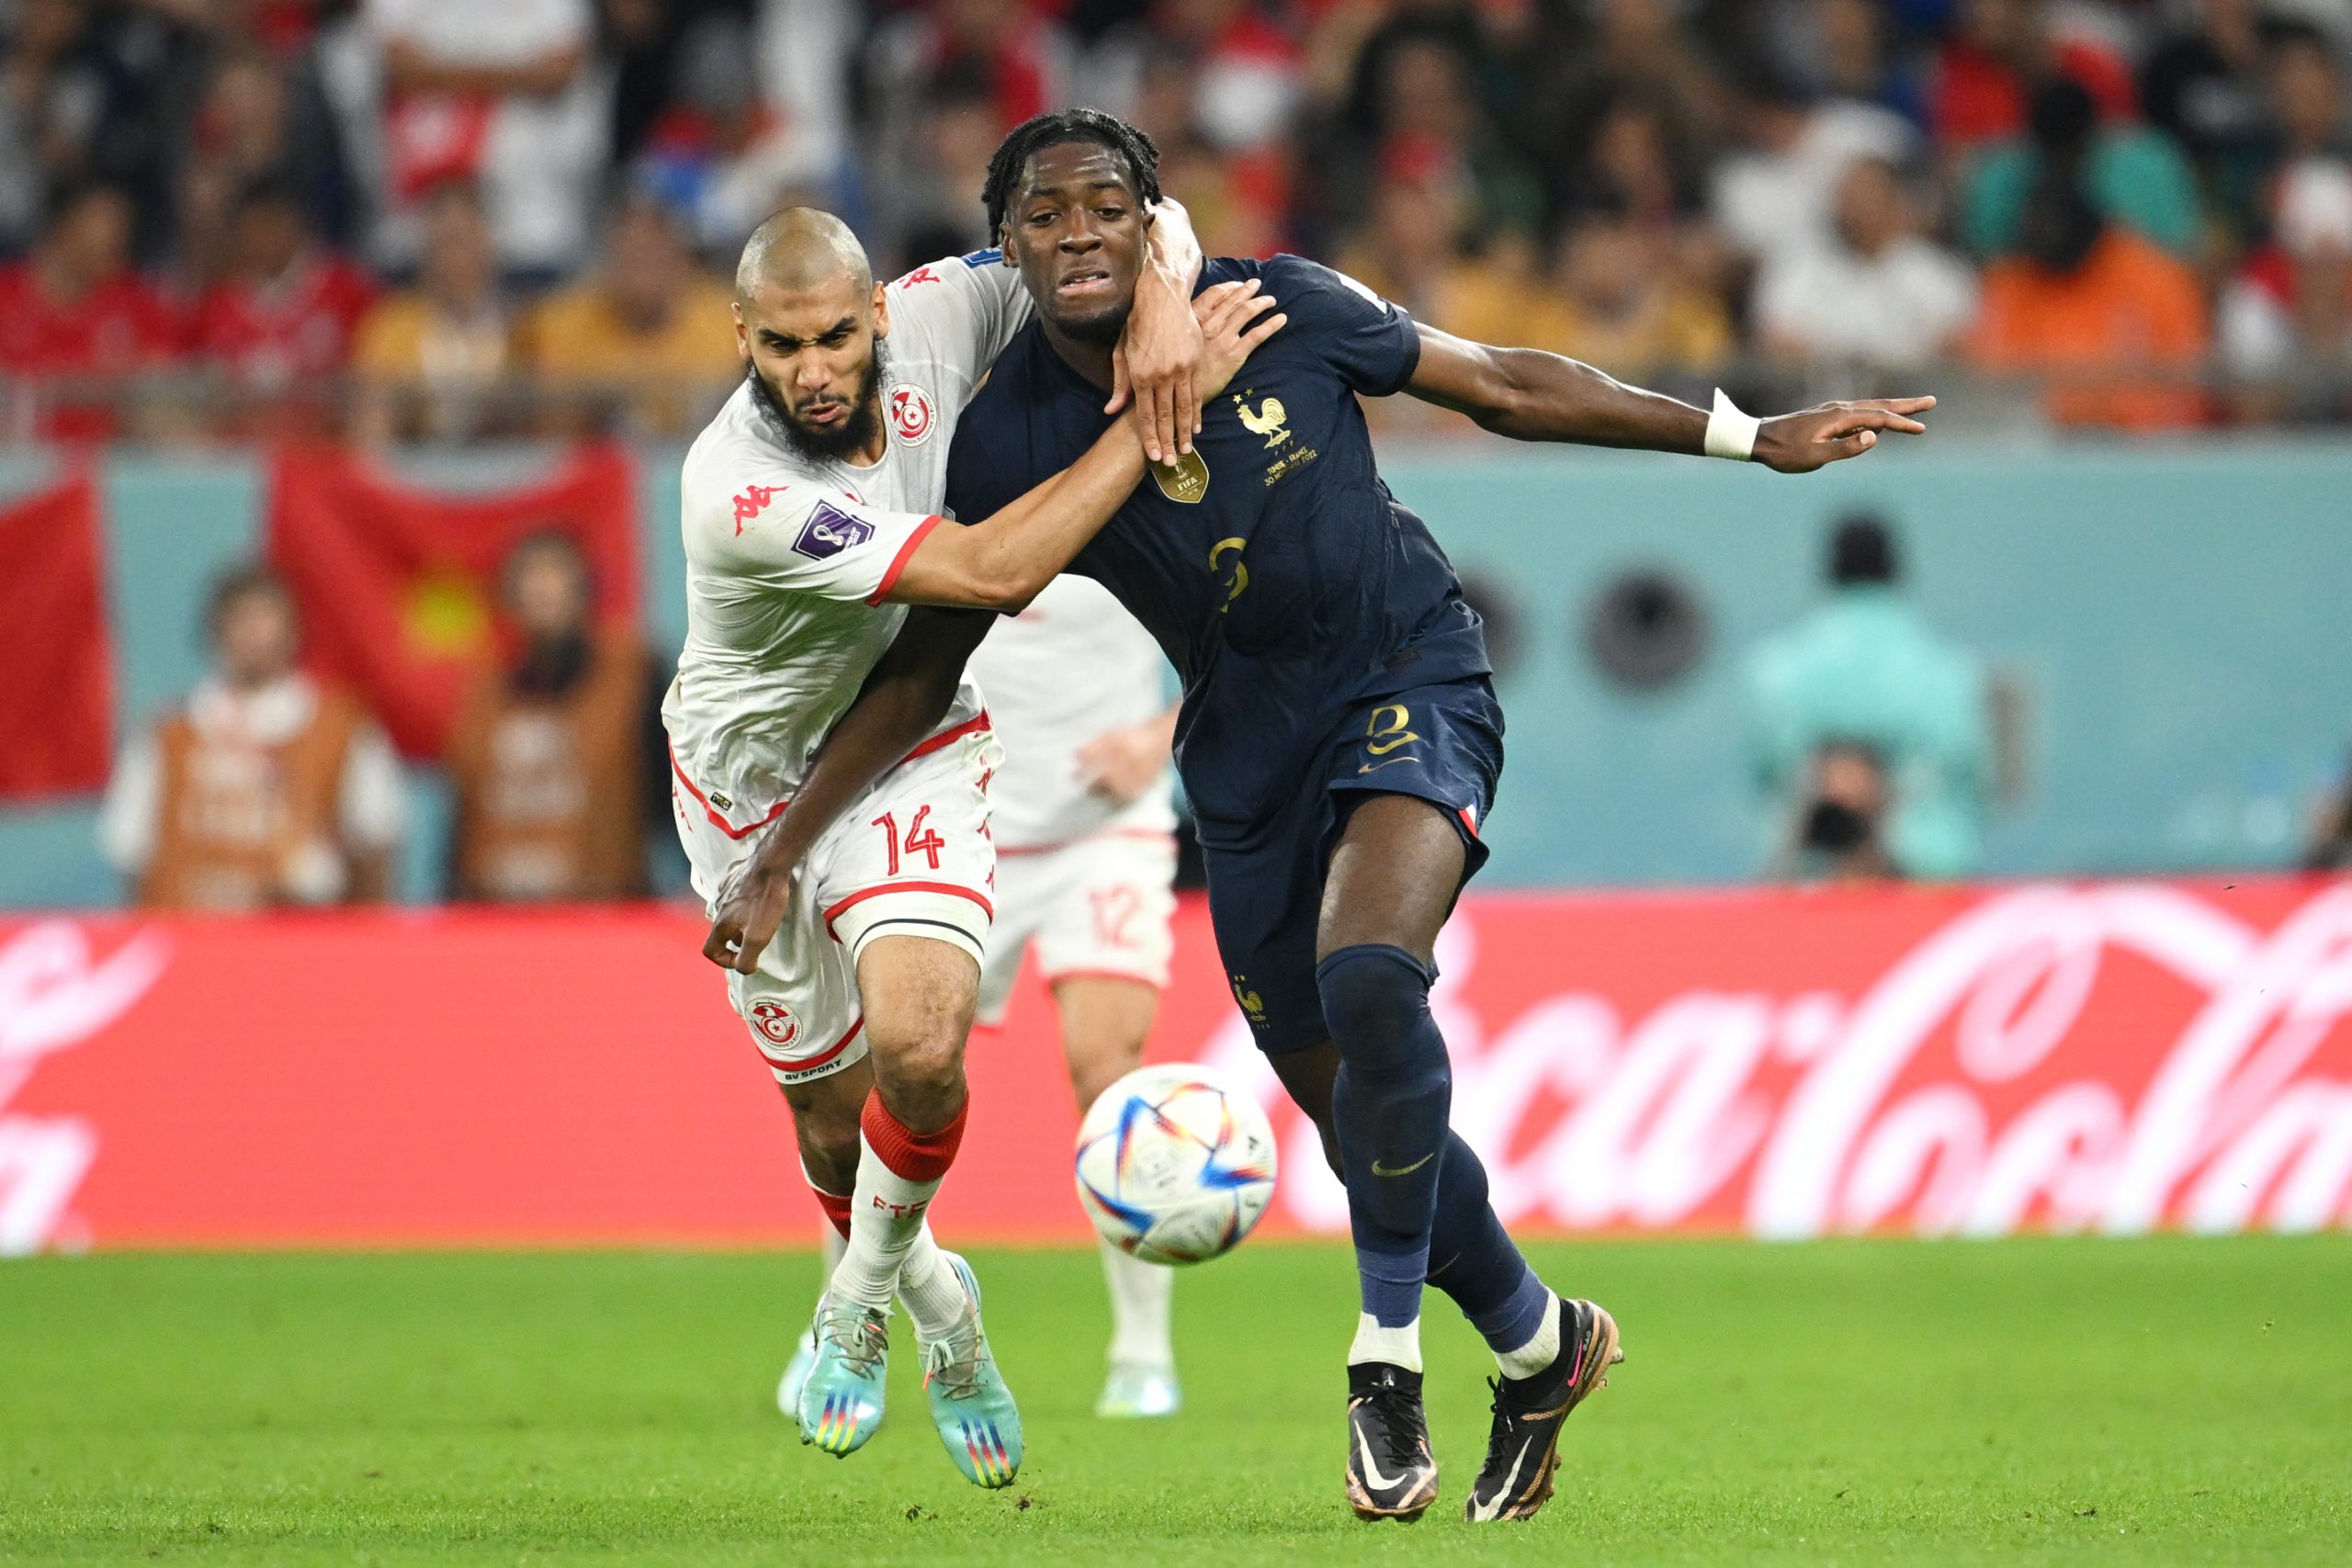 AL RAYYAN, QATAR - NOVEMBER 30: Axel Disasi of France is challenged by Aissa Laidouni of Tunisia during the FIFA World Cup Qatar 2022 Group D match between Tunisia and France at Education City Stadium on November 30, 2022 in Al Rayyan, Qatar. (Photo by Clive Mason/Getty Images)